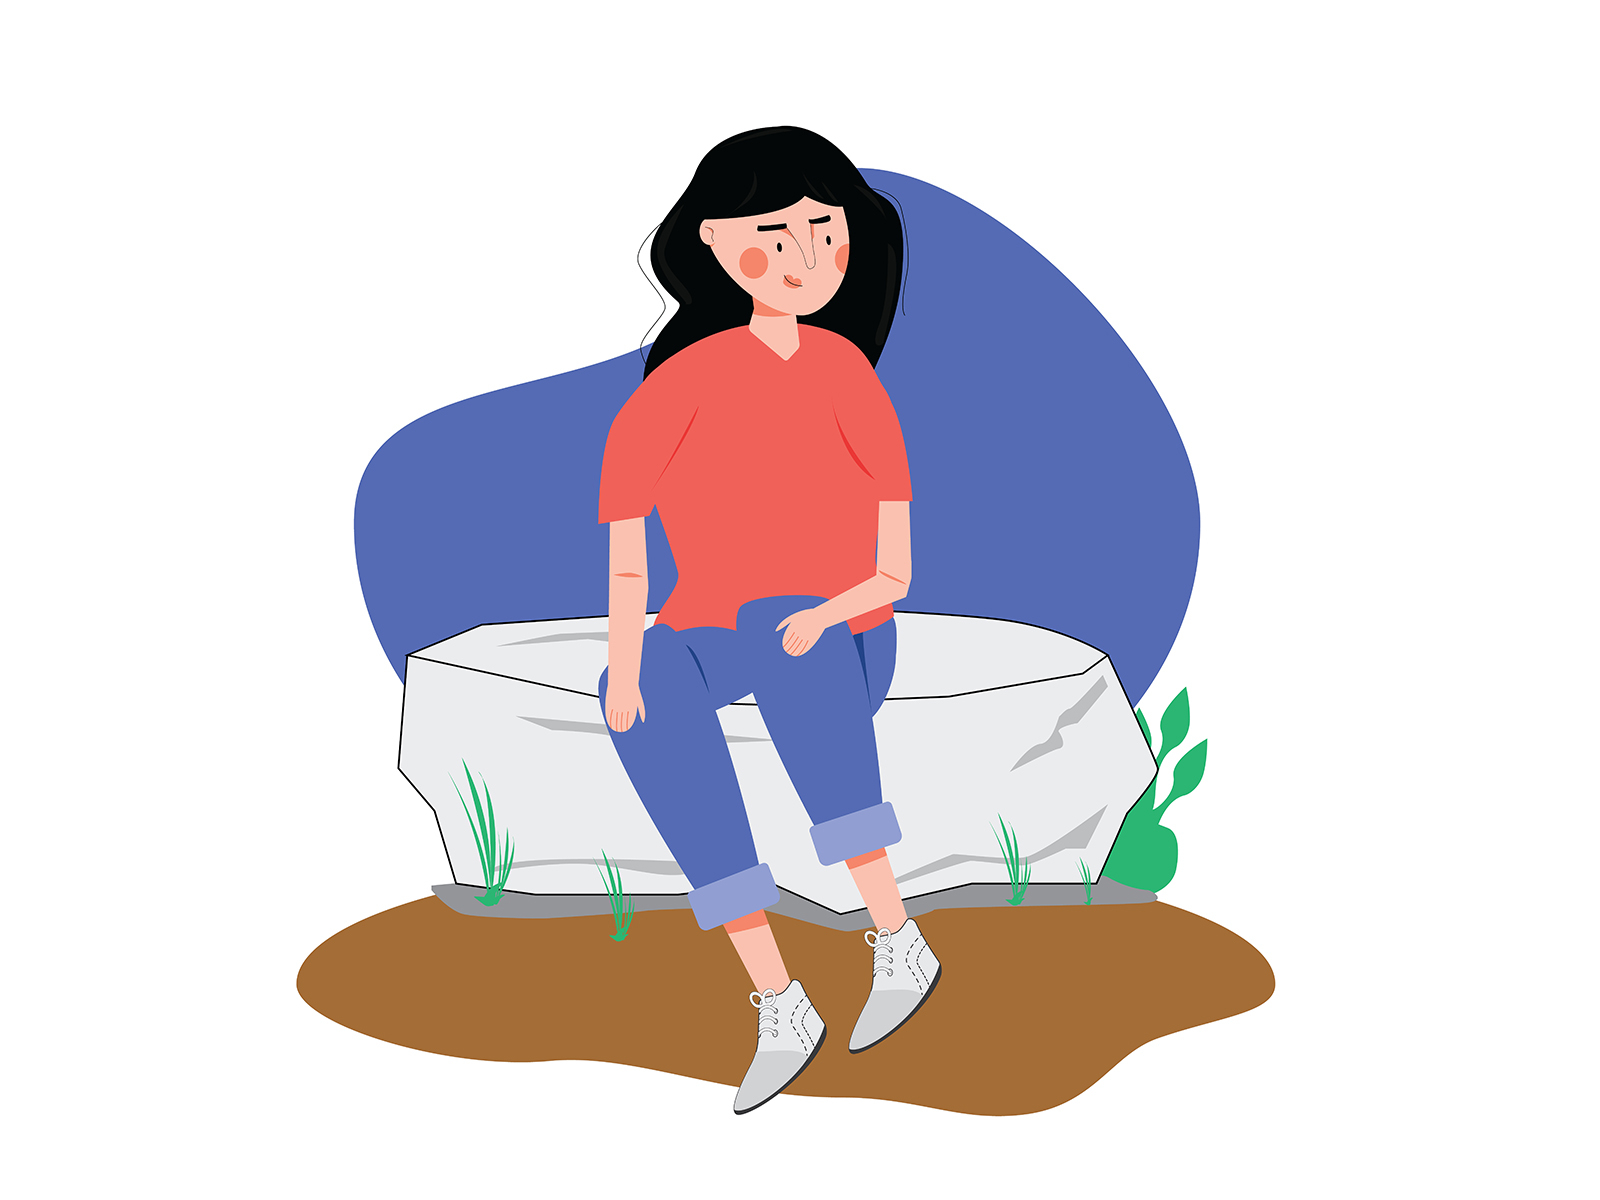 A girl sitting on a rock in a garden by Aakarshit Joshi on Dribbble